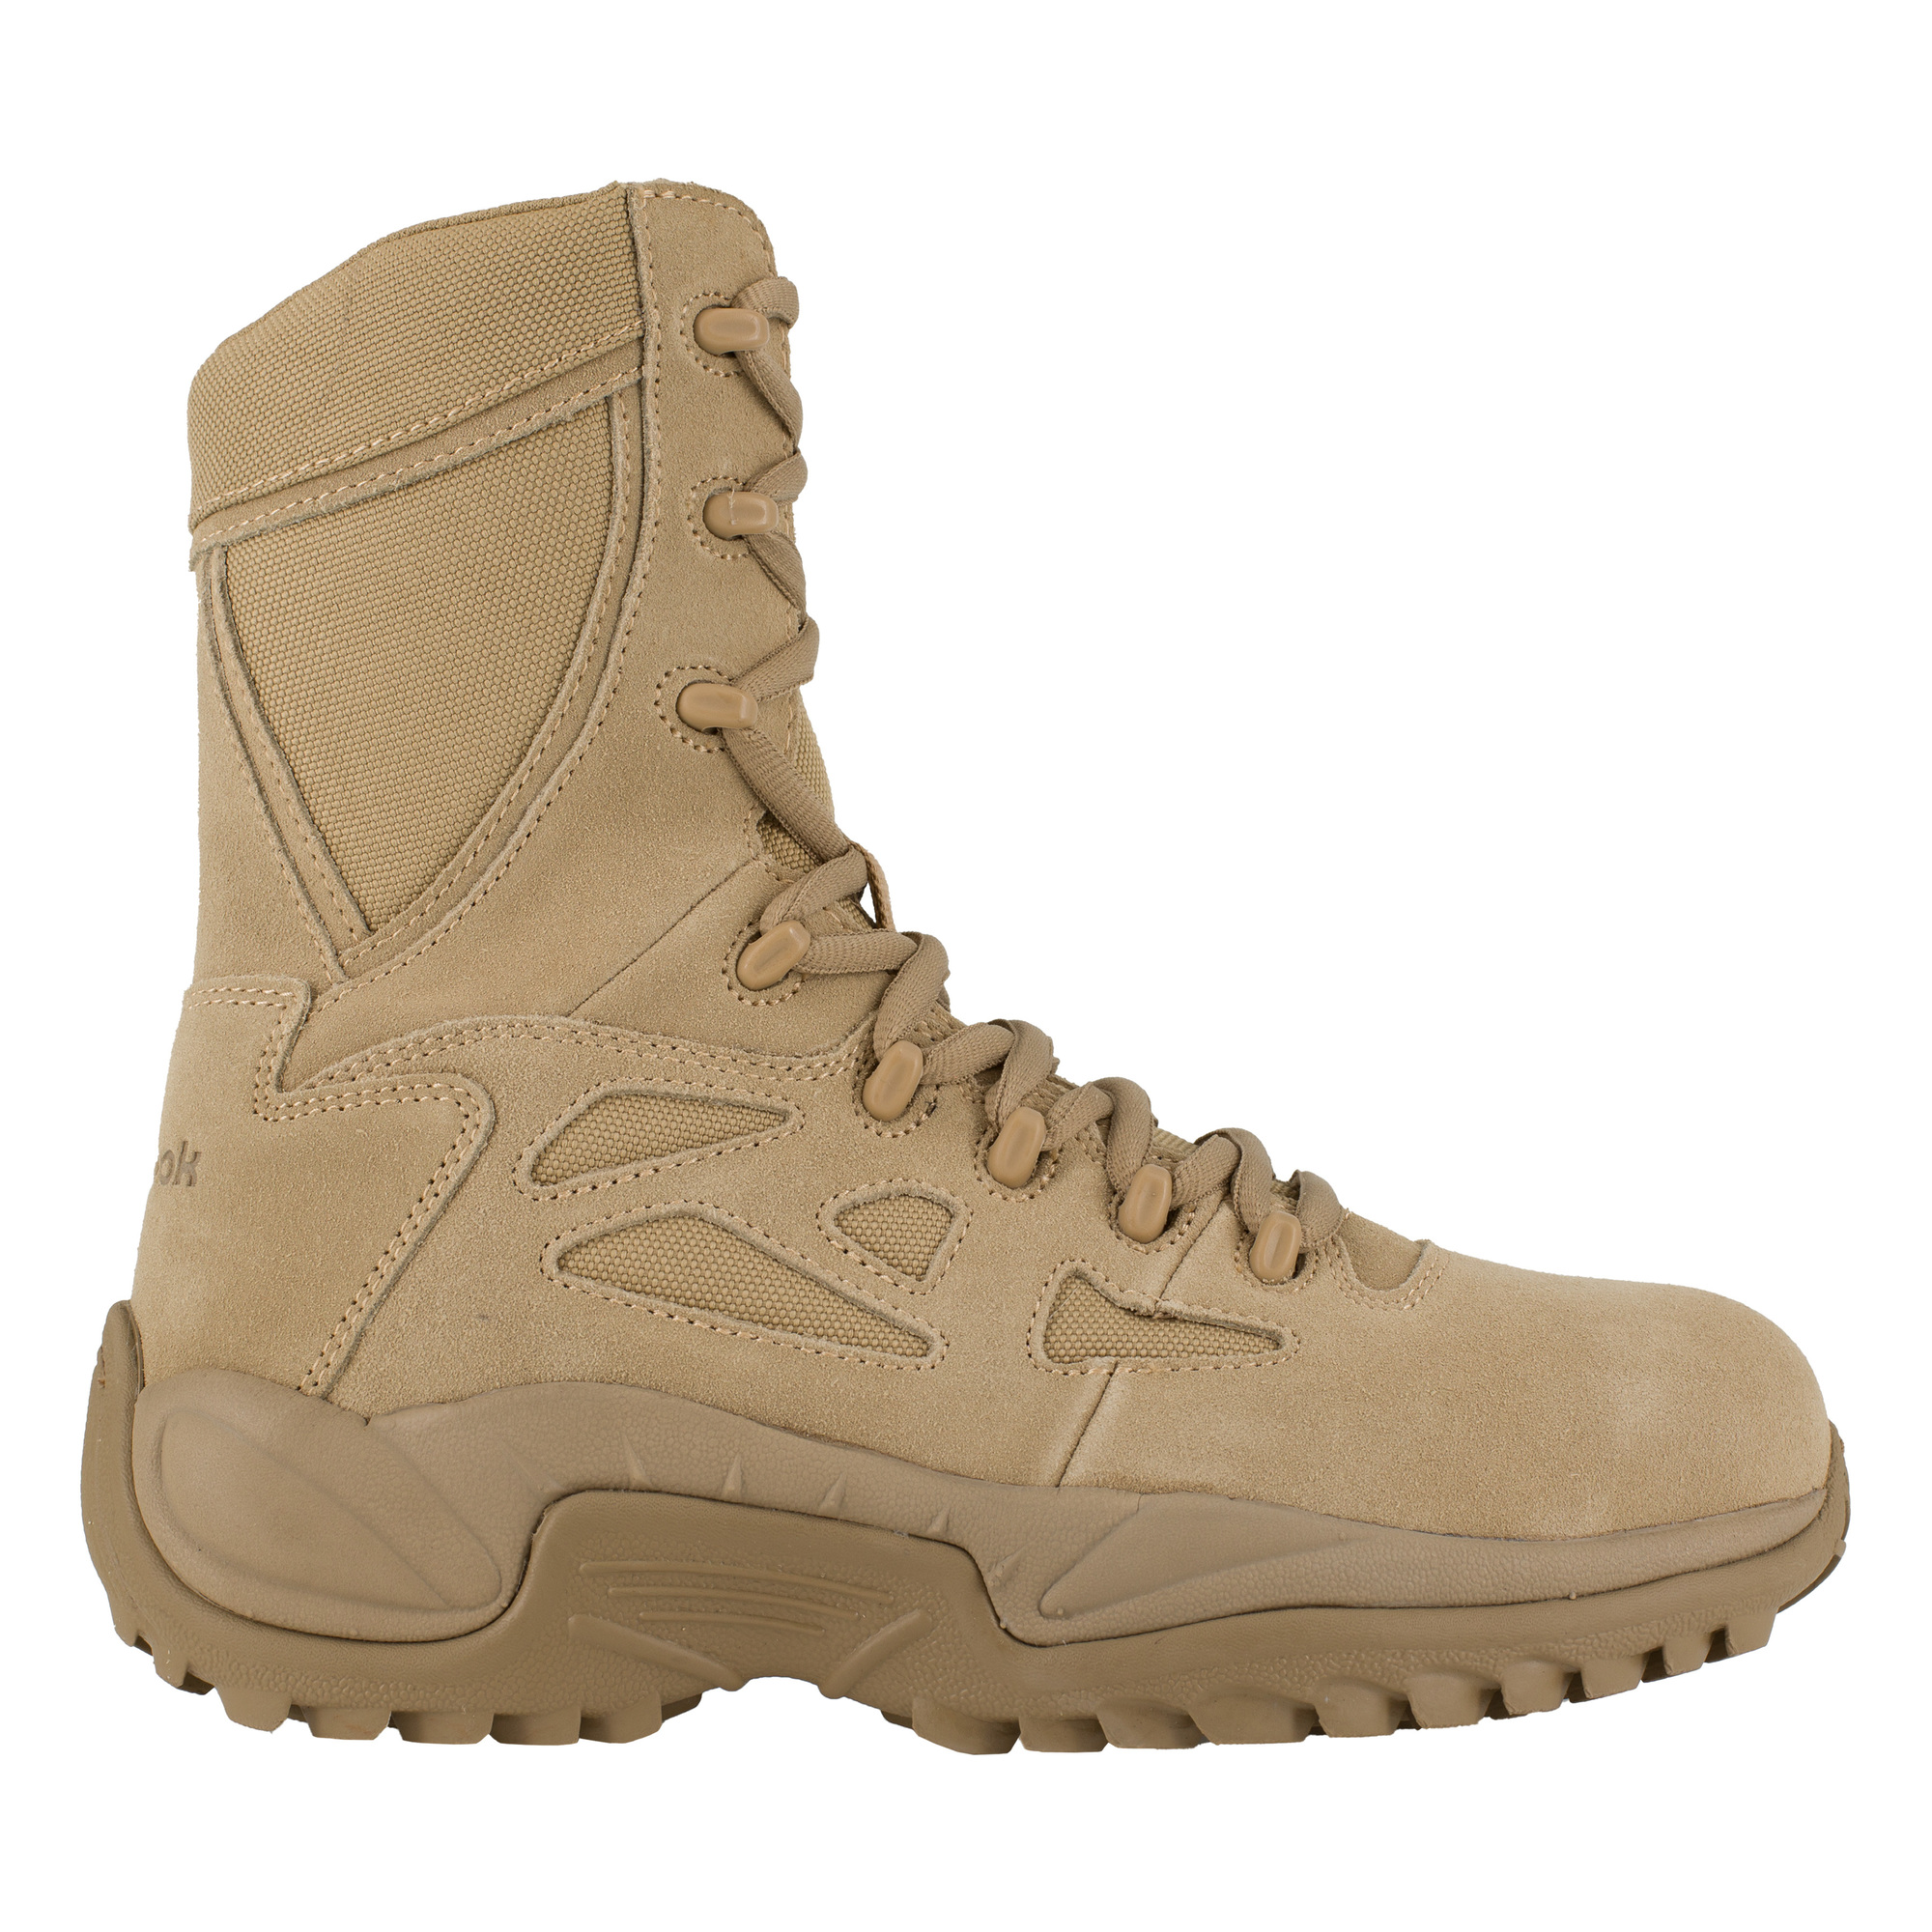 Reebok, 8Inch Stealth Tactical Boot with Side Zipper, Size 9, Width Medium, Color Desert Tan, Model RB894 -  RB894-M-09.0